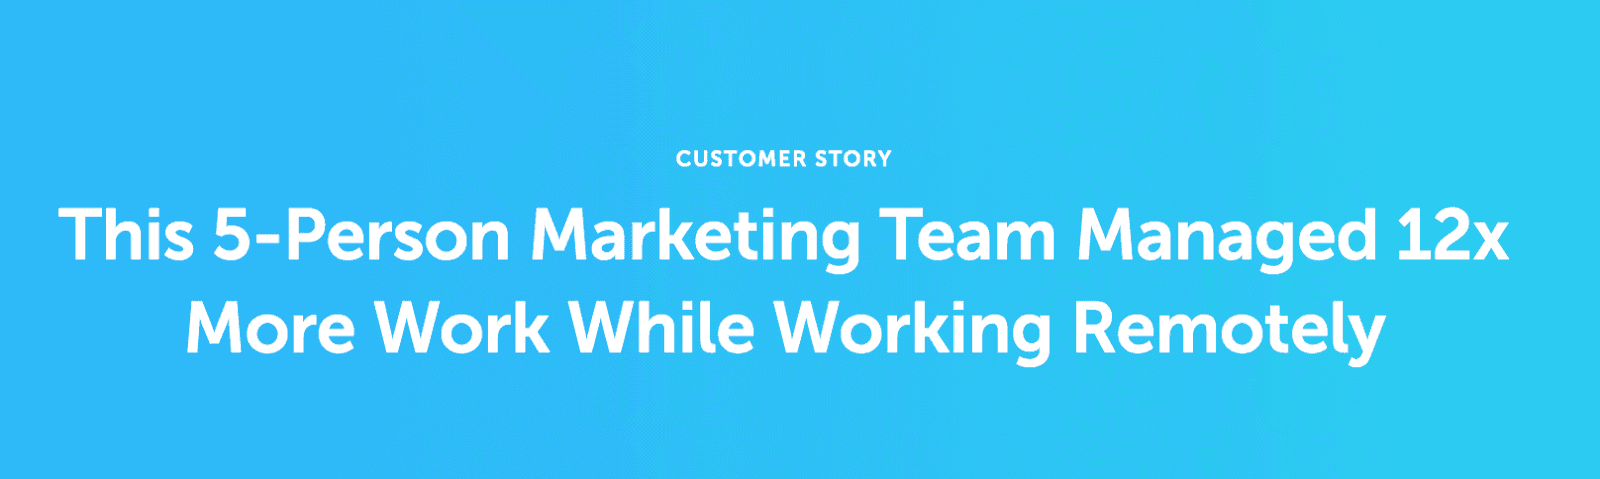 This 5-person marketing team managed 12x more work while working remotely